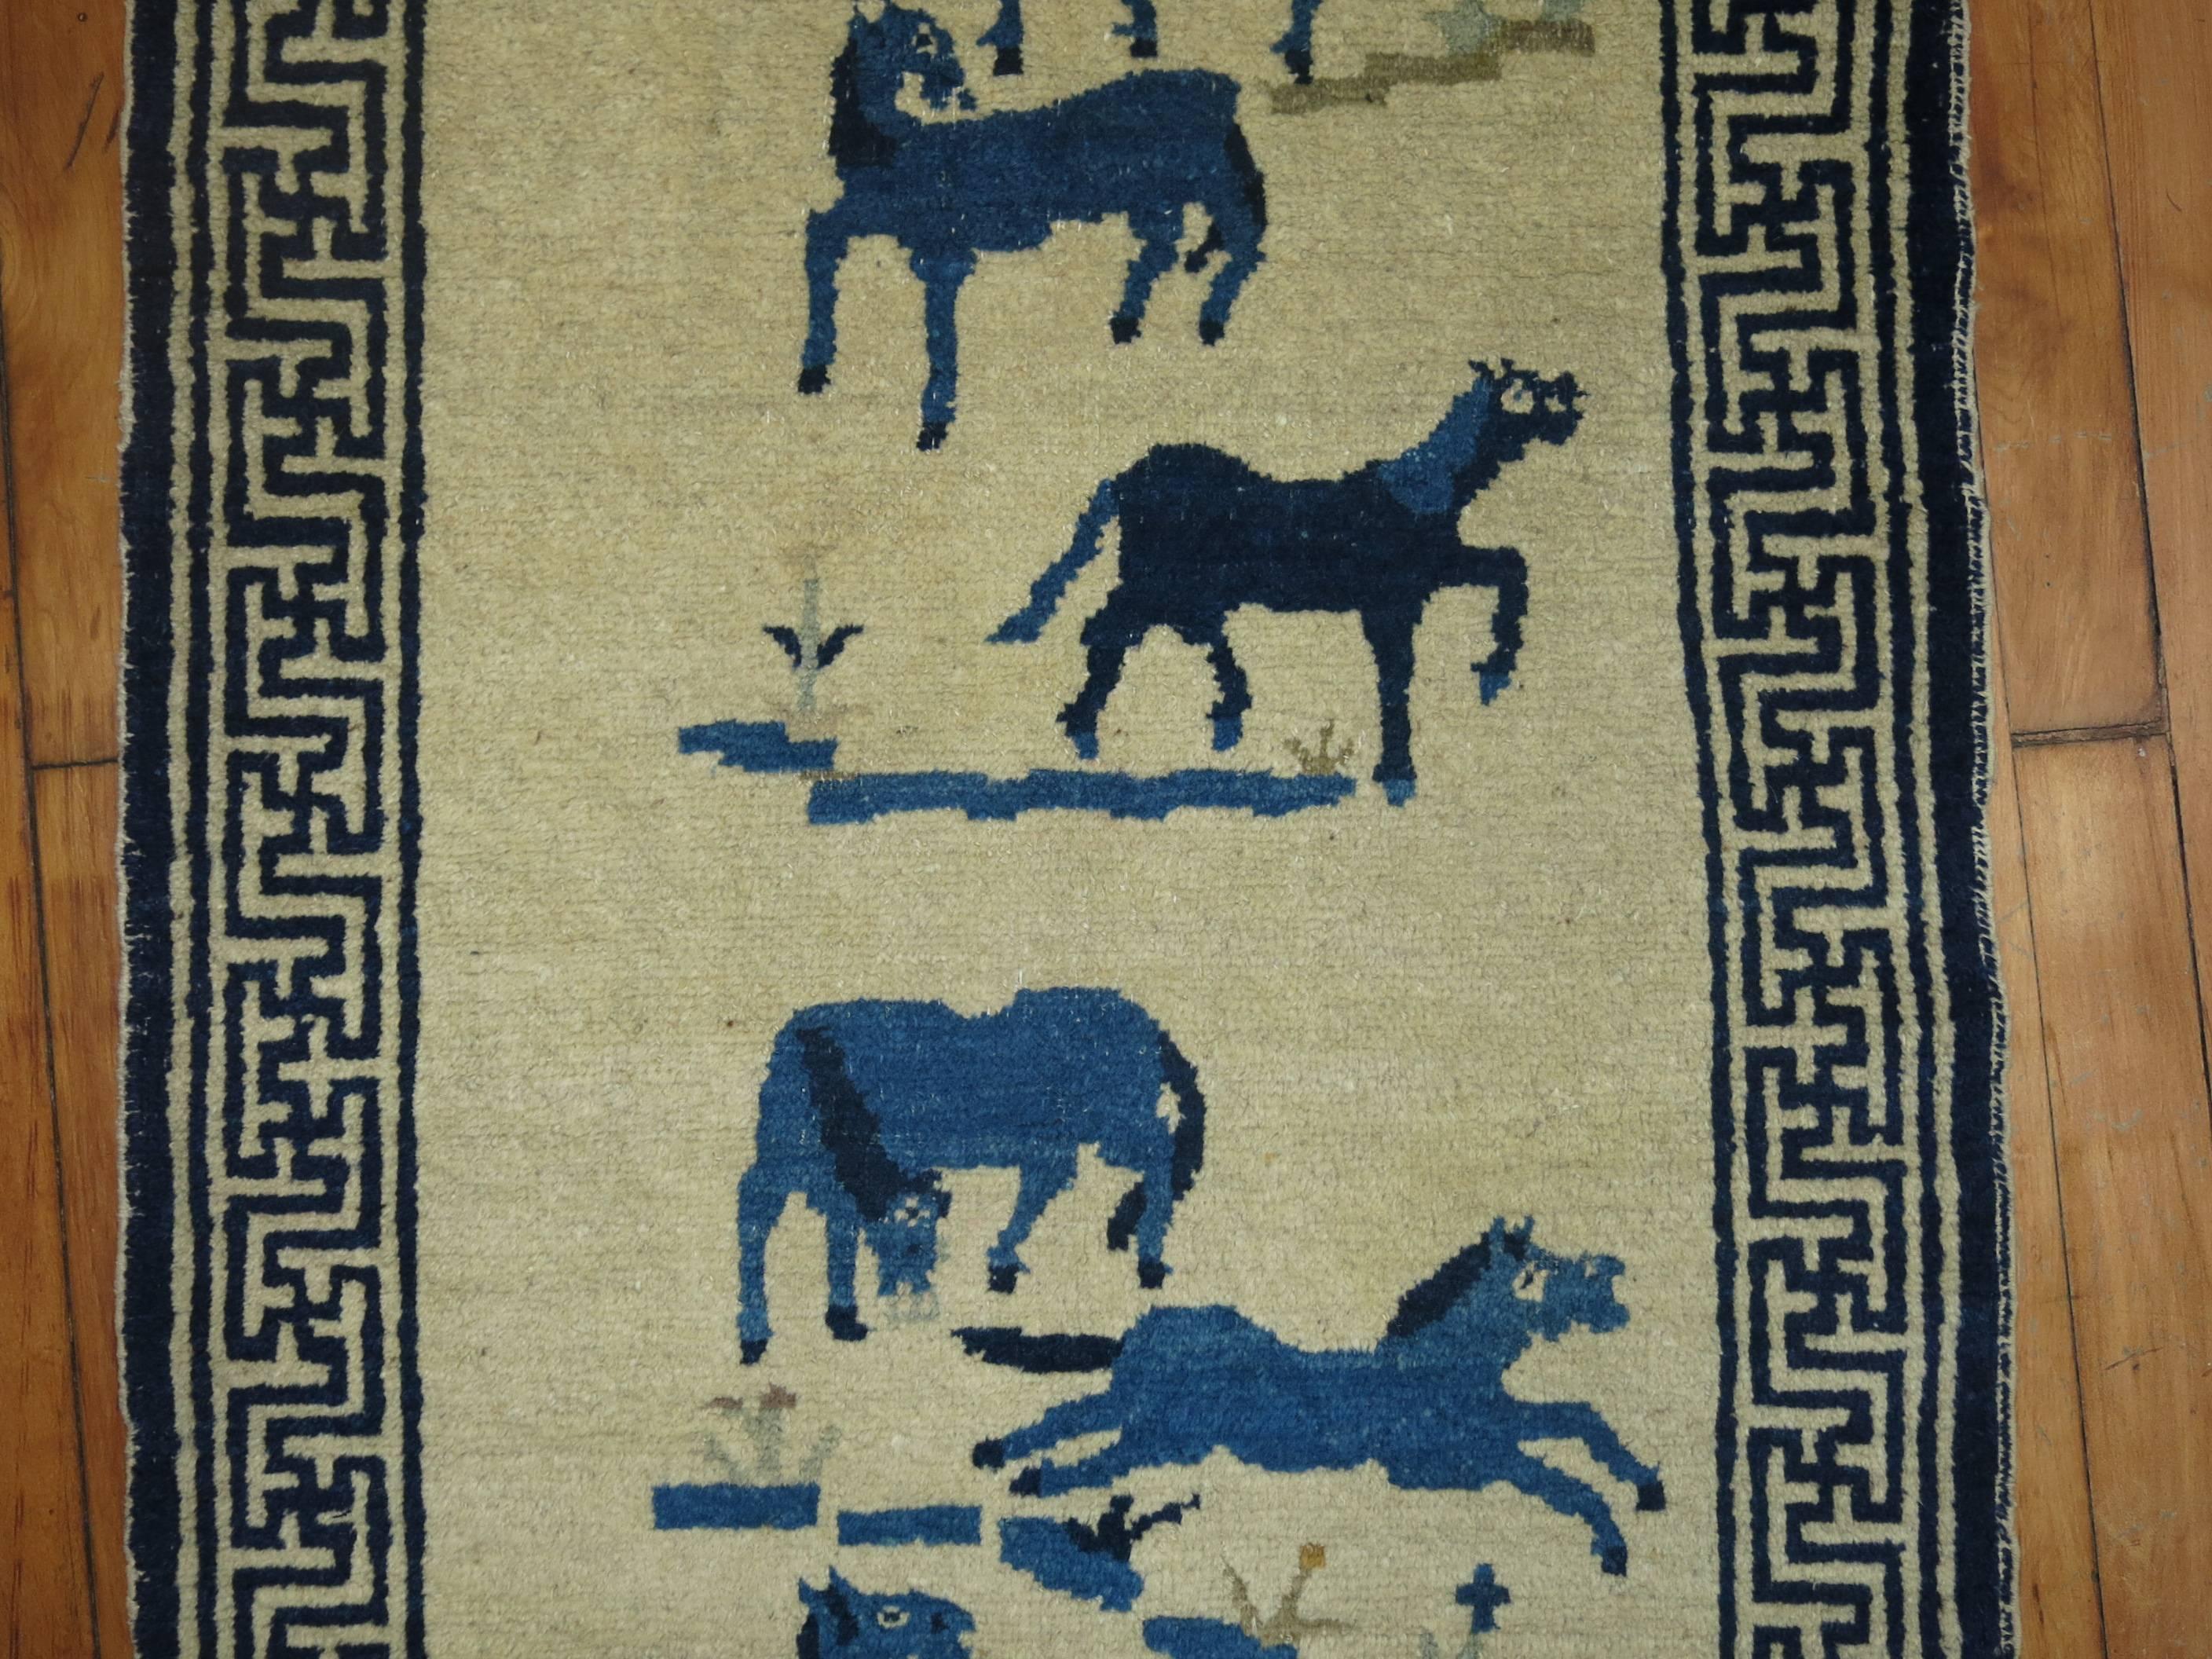 An early 20th century Chinese pictorial horses rug. Six blue horses flocking on a ivory colored ground.

2'2